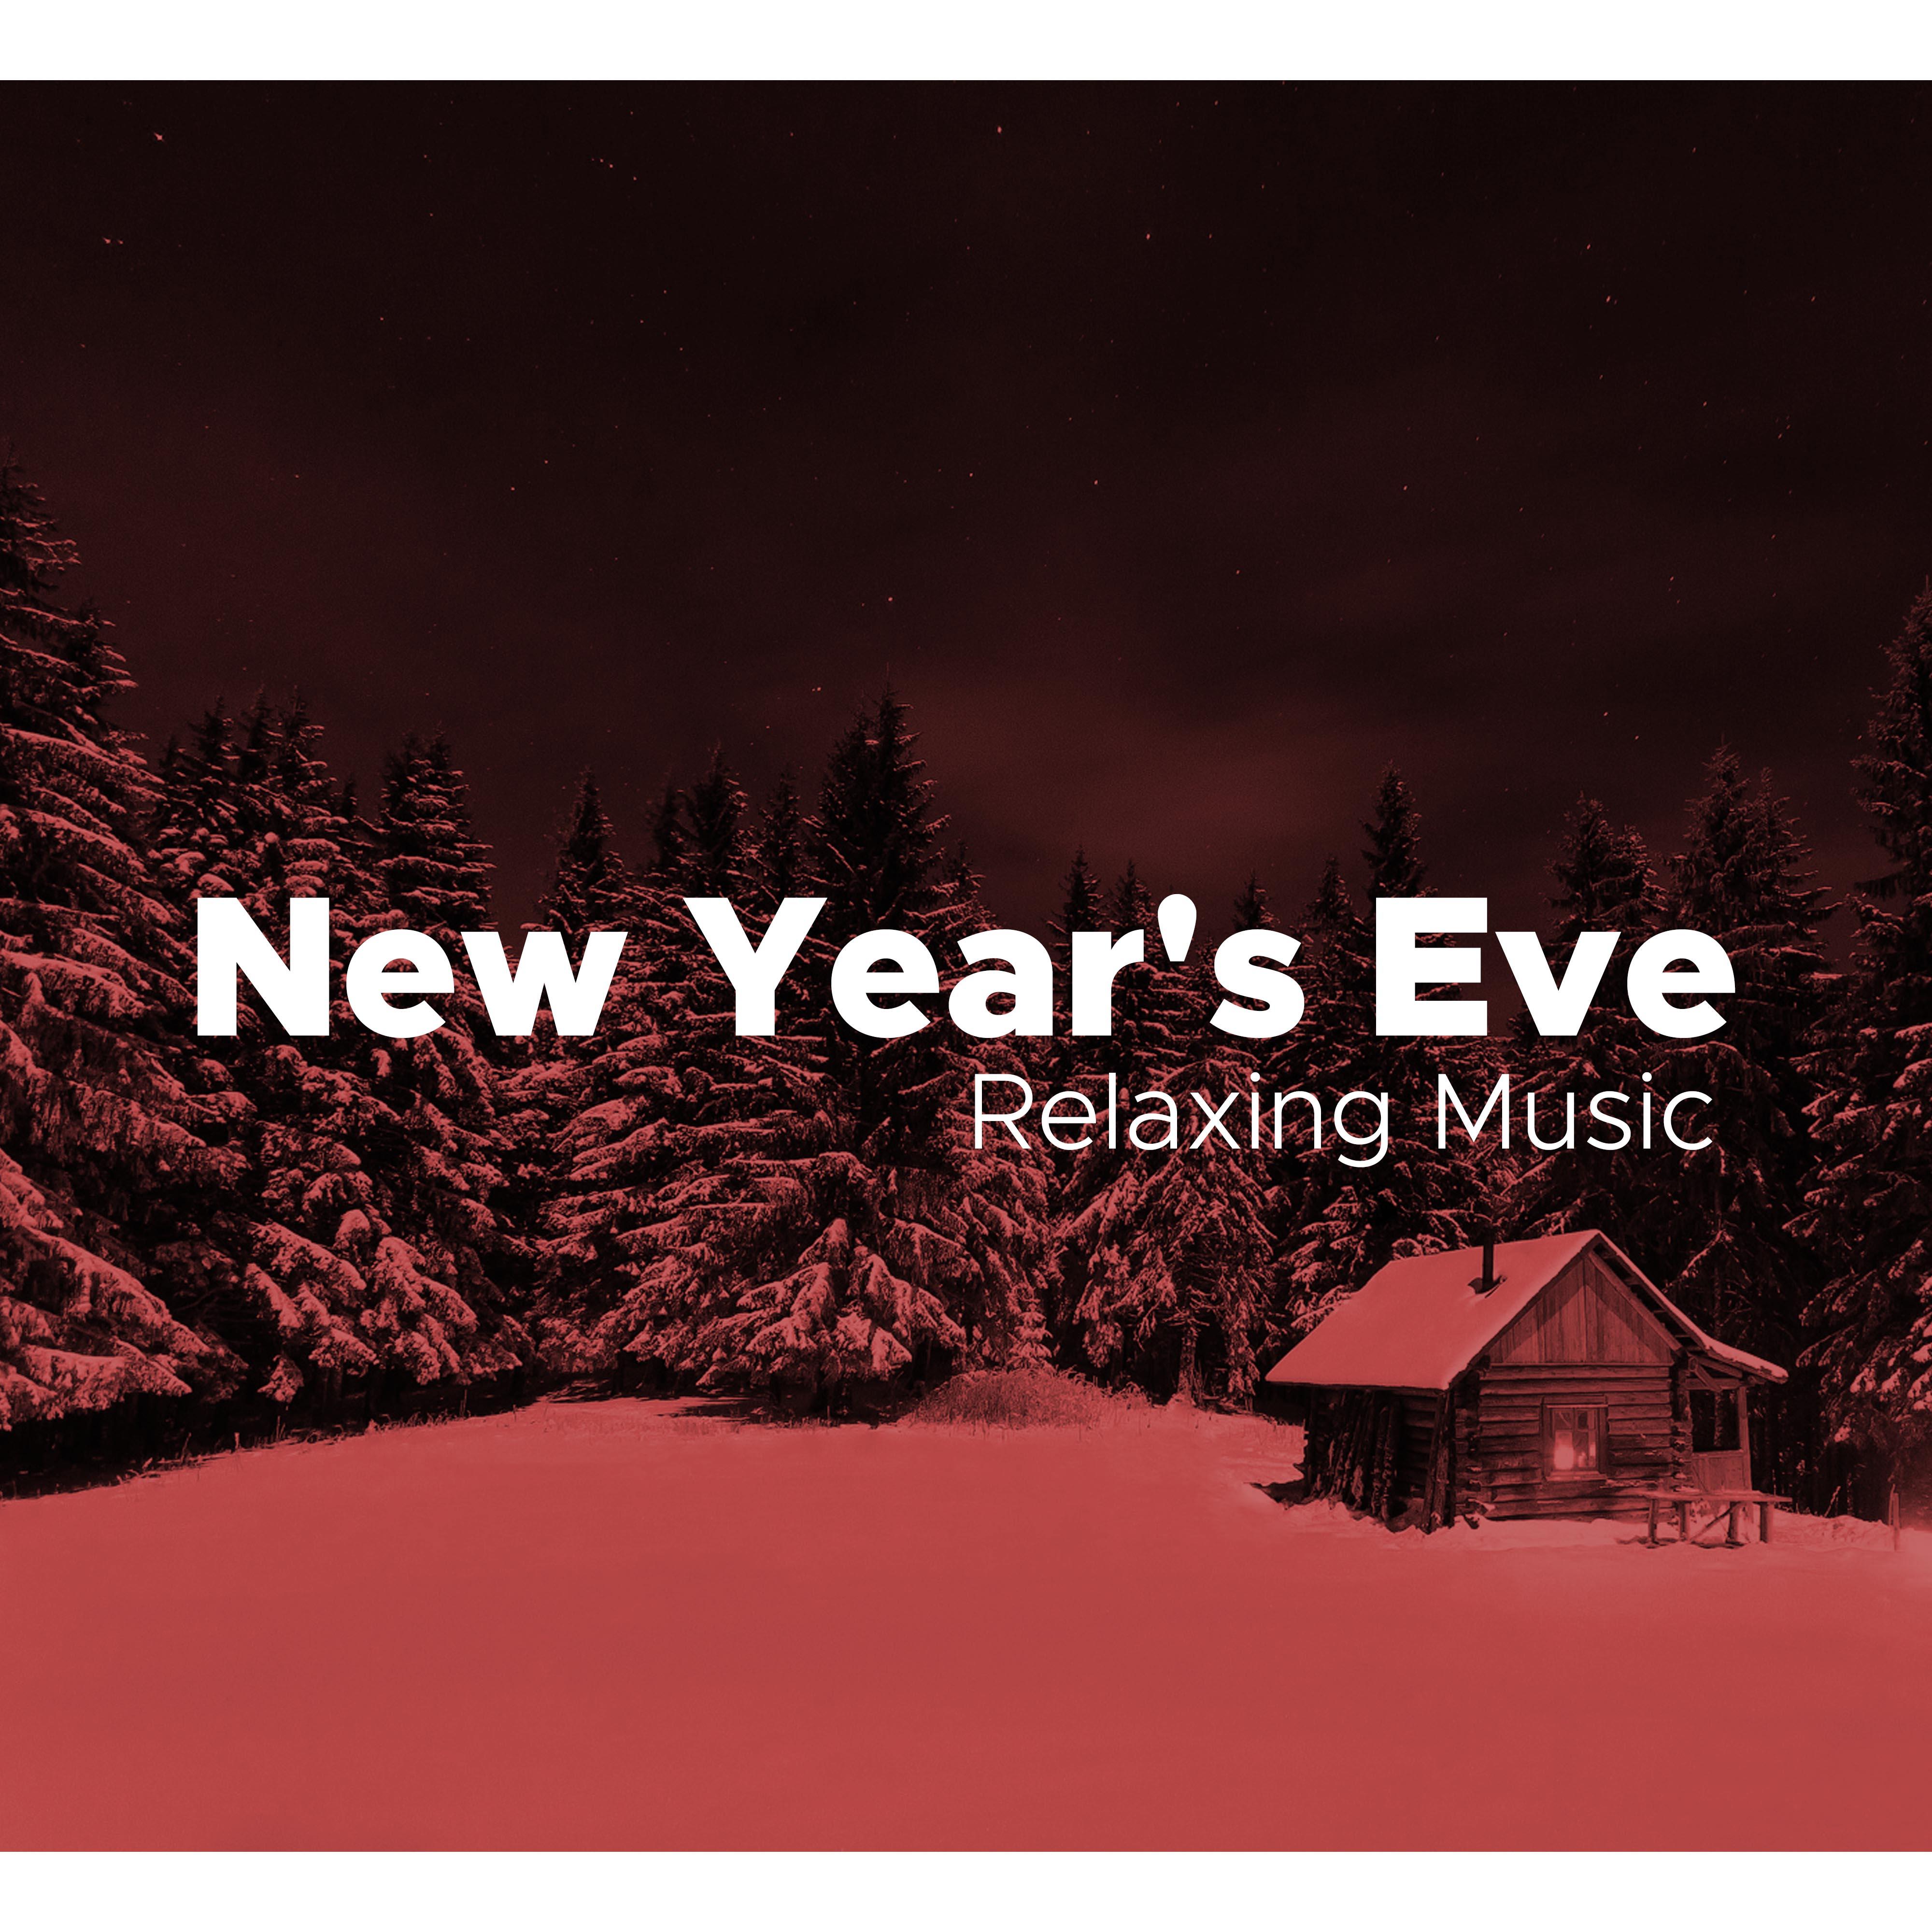 New Year's Eve: Relaxing Music